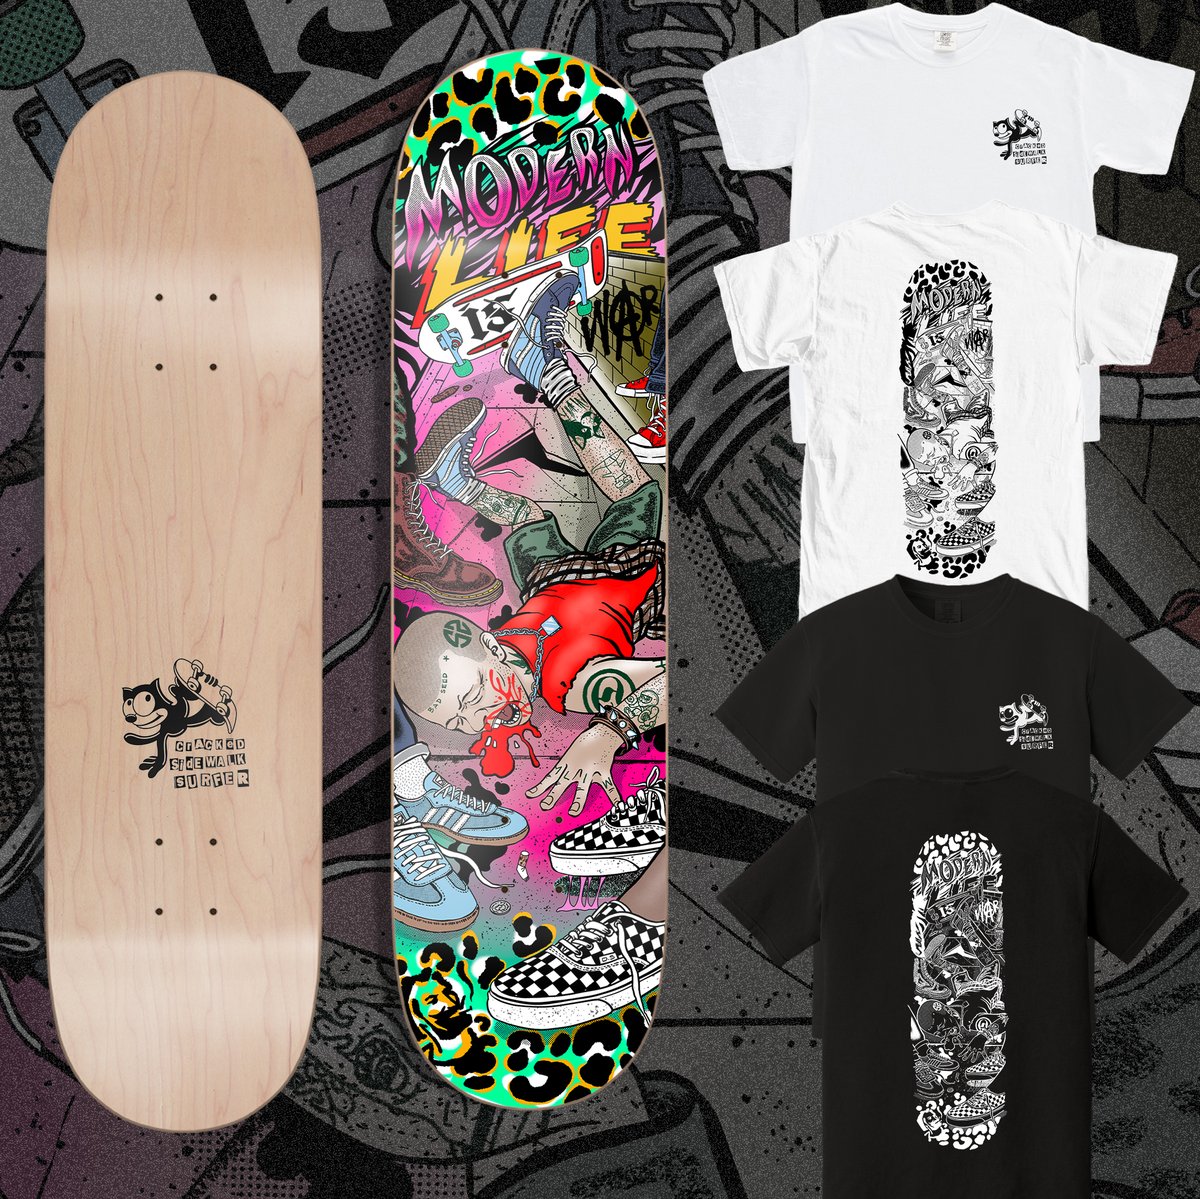 CRACKED SIDEWALK SURFER | Collaboration between MLIW/DAN SMITH/SUBSECT SKATESHOP Pre-order at modernlifeiswar.bigcartel.com Art by Dan Smith. US only, will ship roughly 2-3 months after pre-order window ends. Pre-orders end March 4